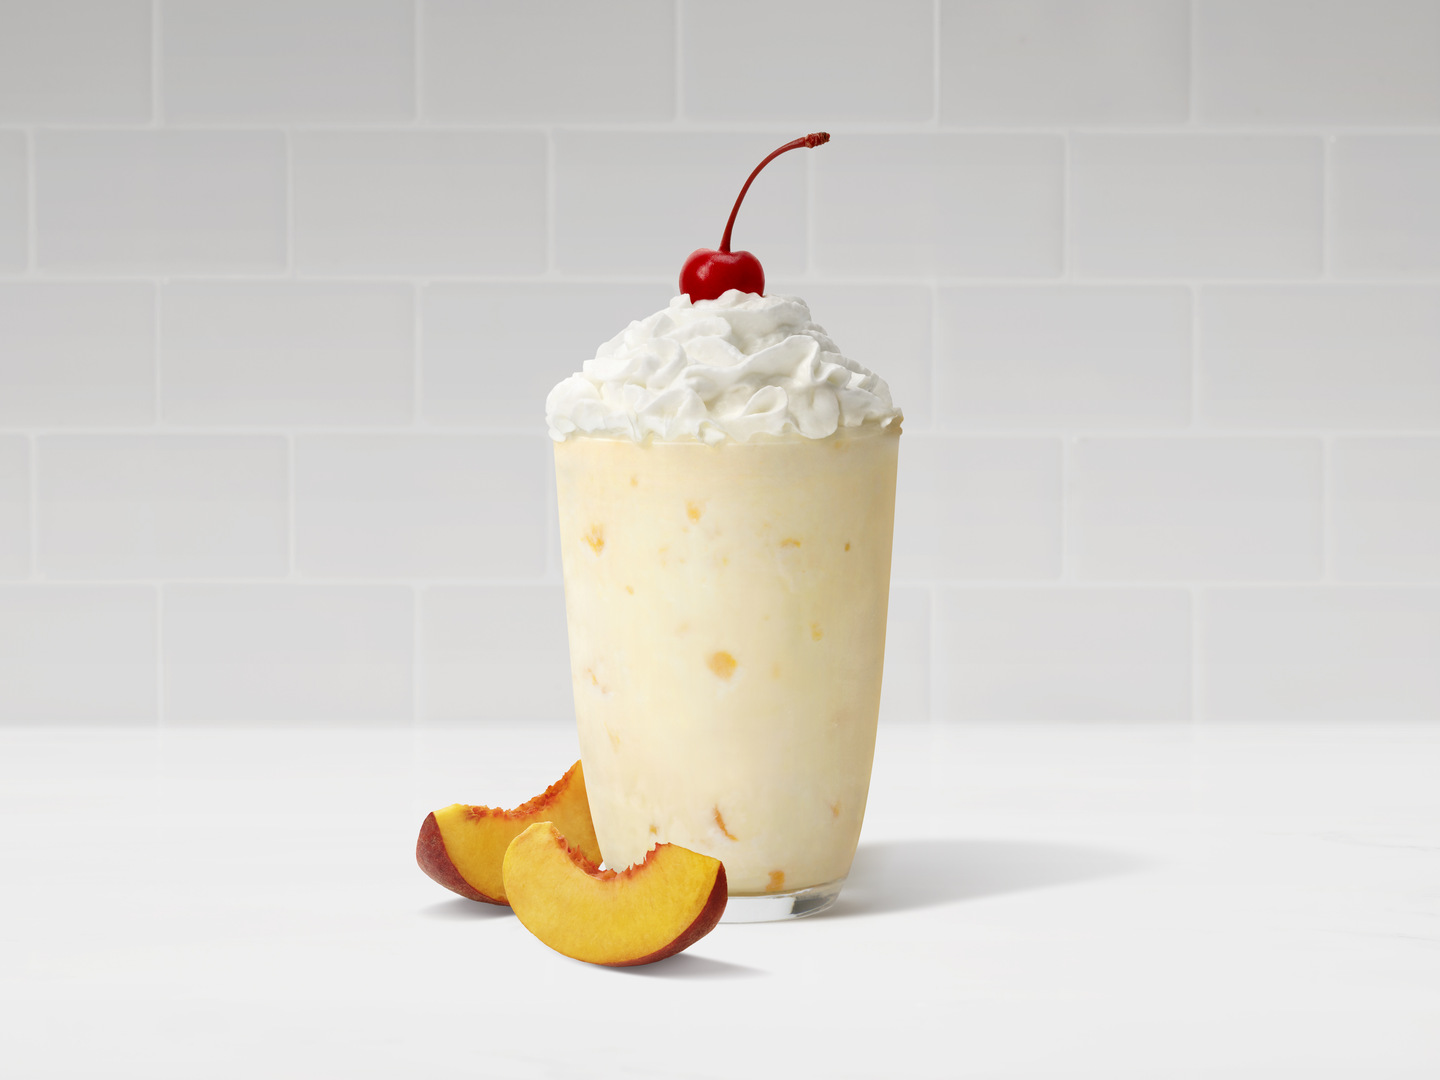 The iconic Chick-fil-A Peach Milkshake next to two slices of peaches on a white countertop.